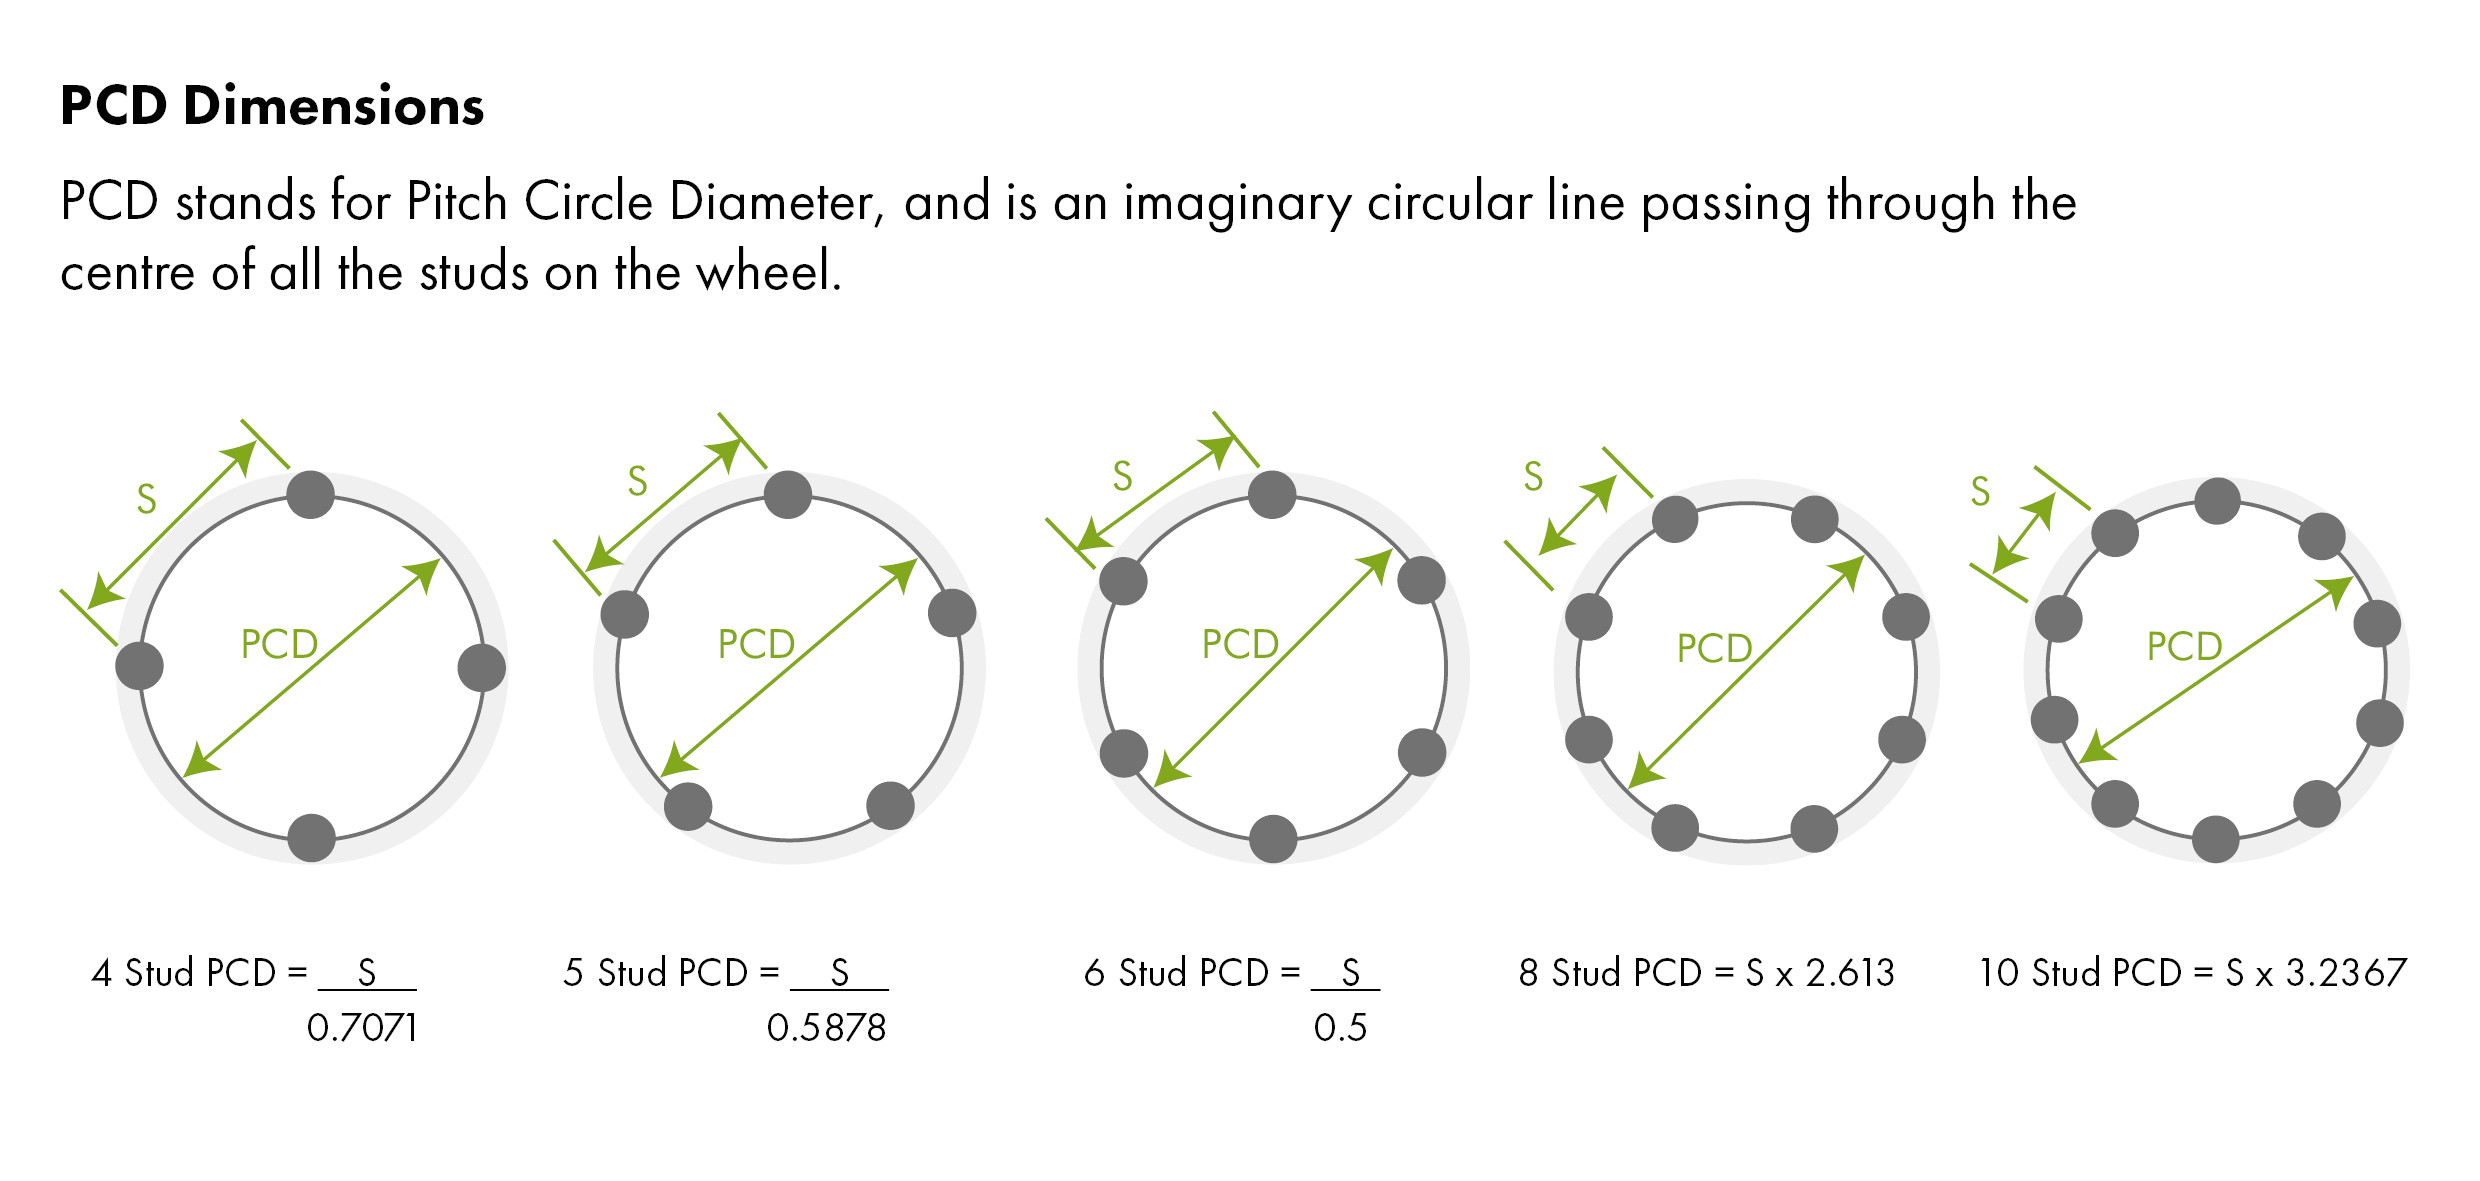 click on the image below to enlarge or download how to calculate the pcd pitch circle diameter of a wheel